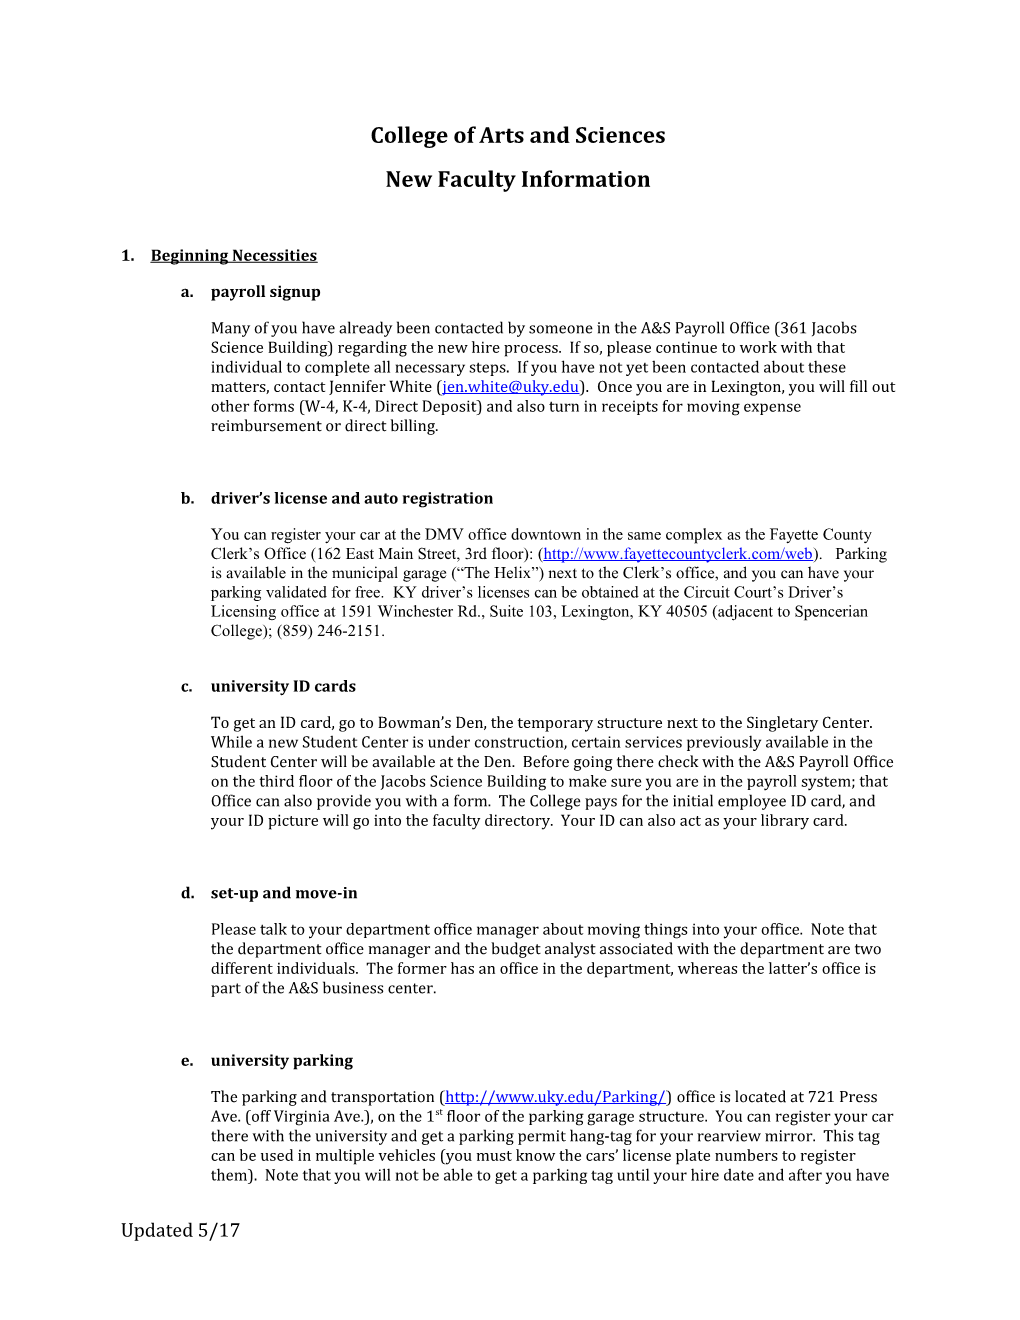 University of Kentucky English Department New Faculty Wiki, Updated 5/2008